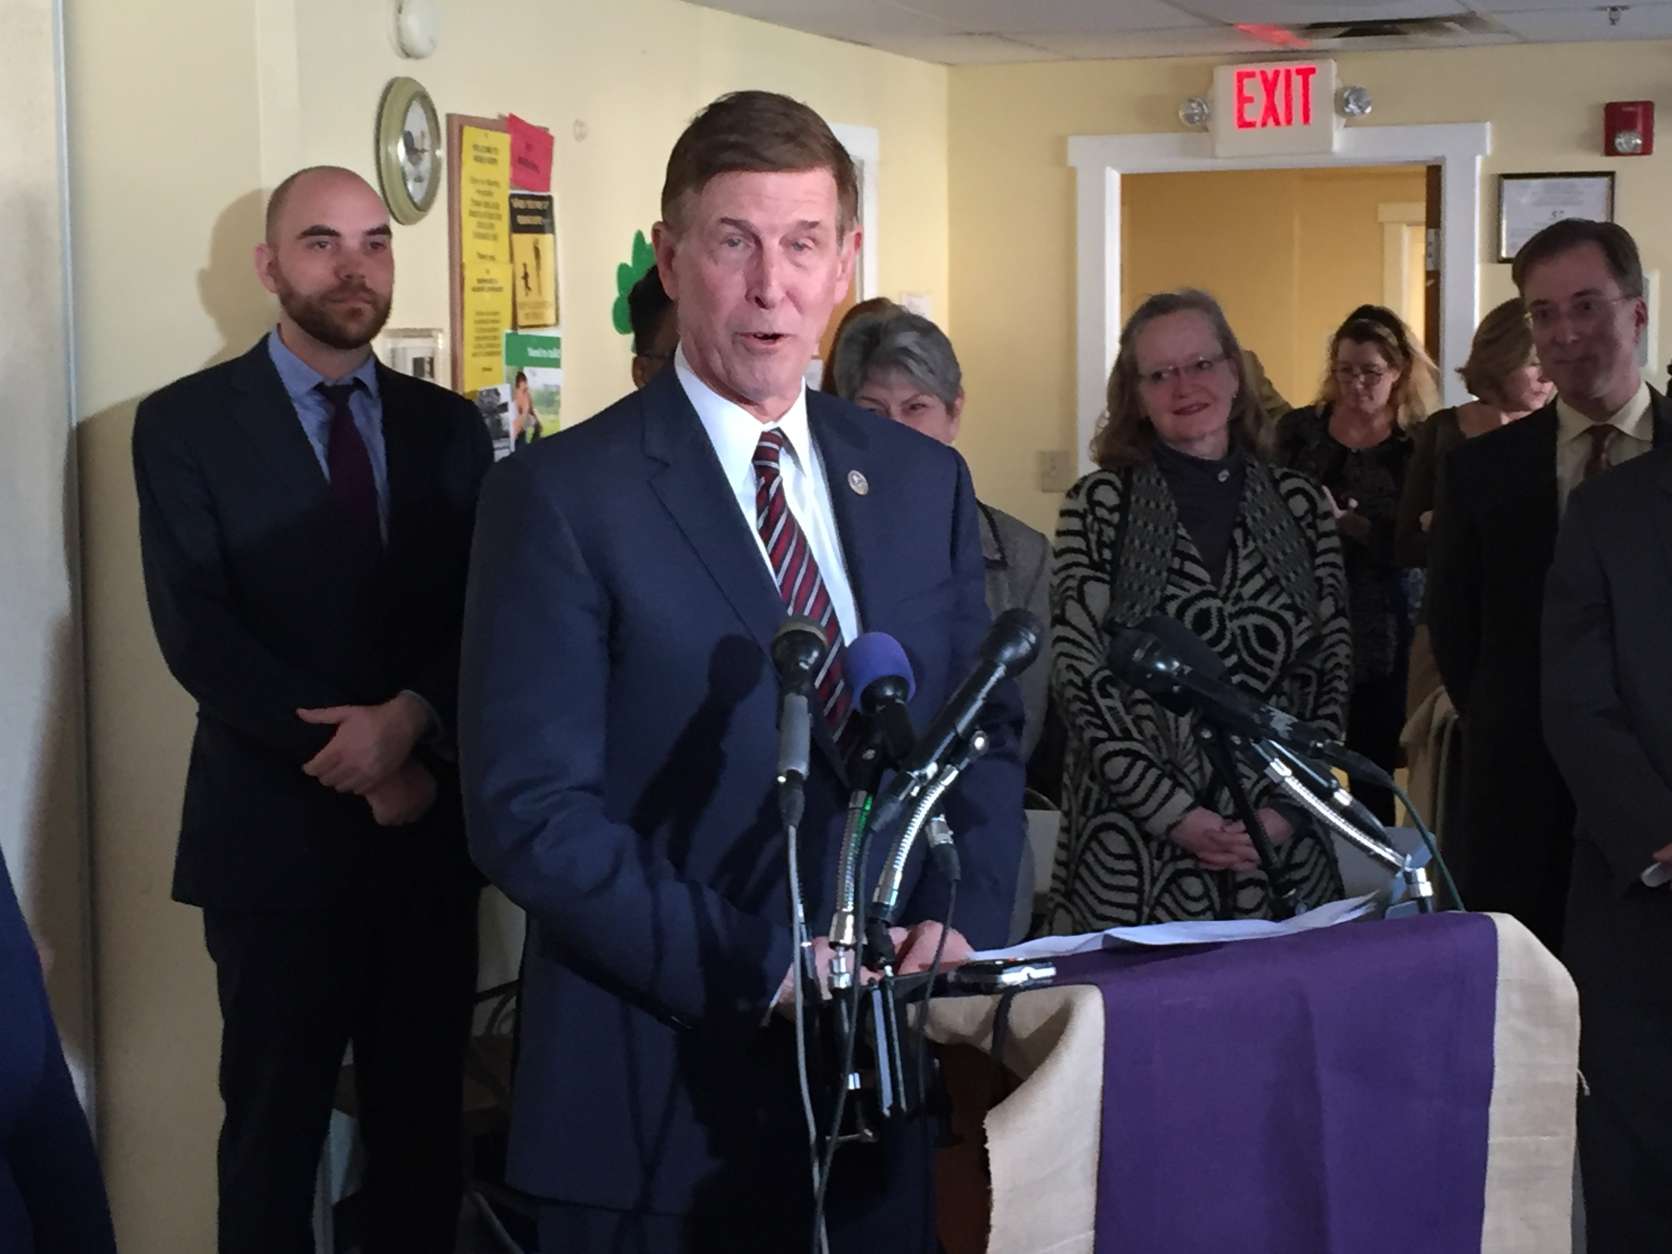 "We're here to make sure the remarkable, resilient, inimitable fabric of our nation of immigrants is not destroyed by the scorched earth tactics that have come out of this recent administration," said Rep. Don Beyer.    (WTOP/Michelle Basch)